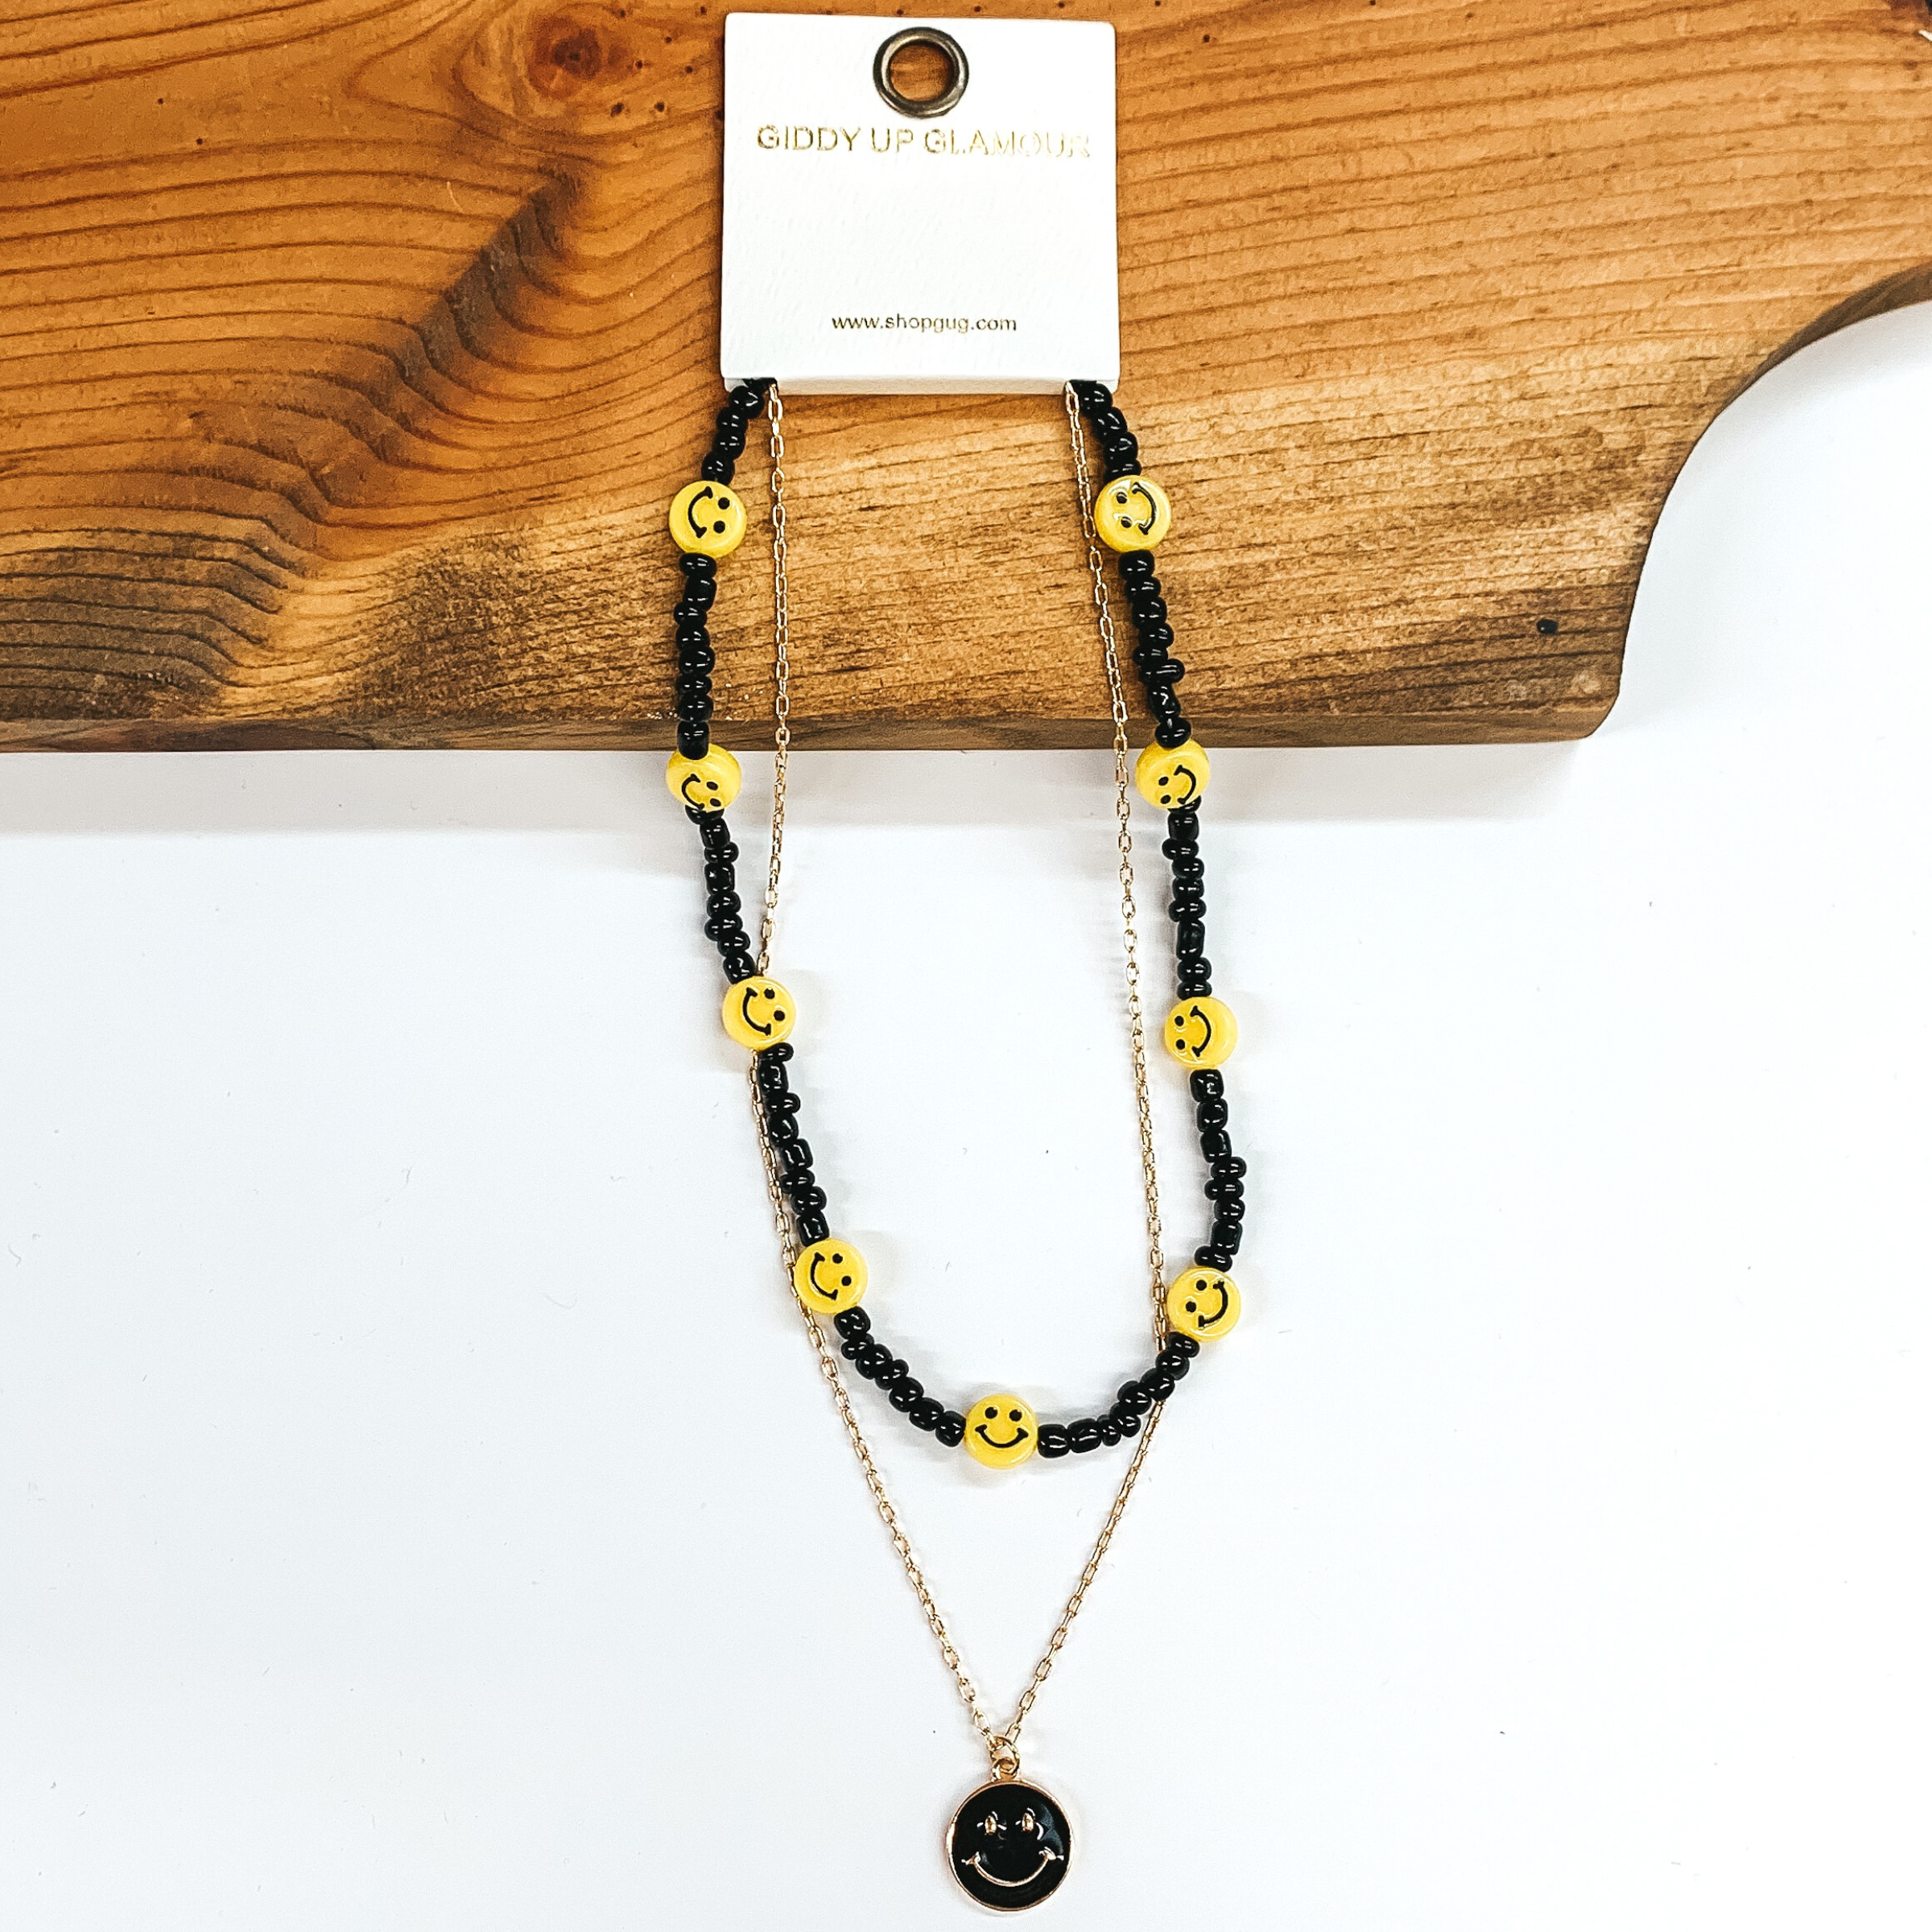 Double Layered Black Beaded and Chain Necklace with Happy Face Pendant in Black - Giddy Up Glamour Boutique